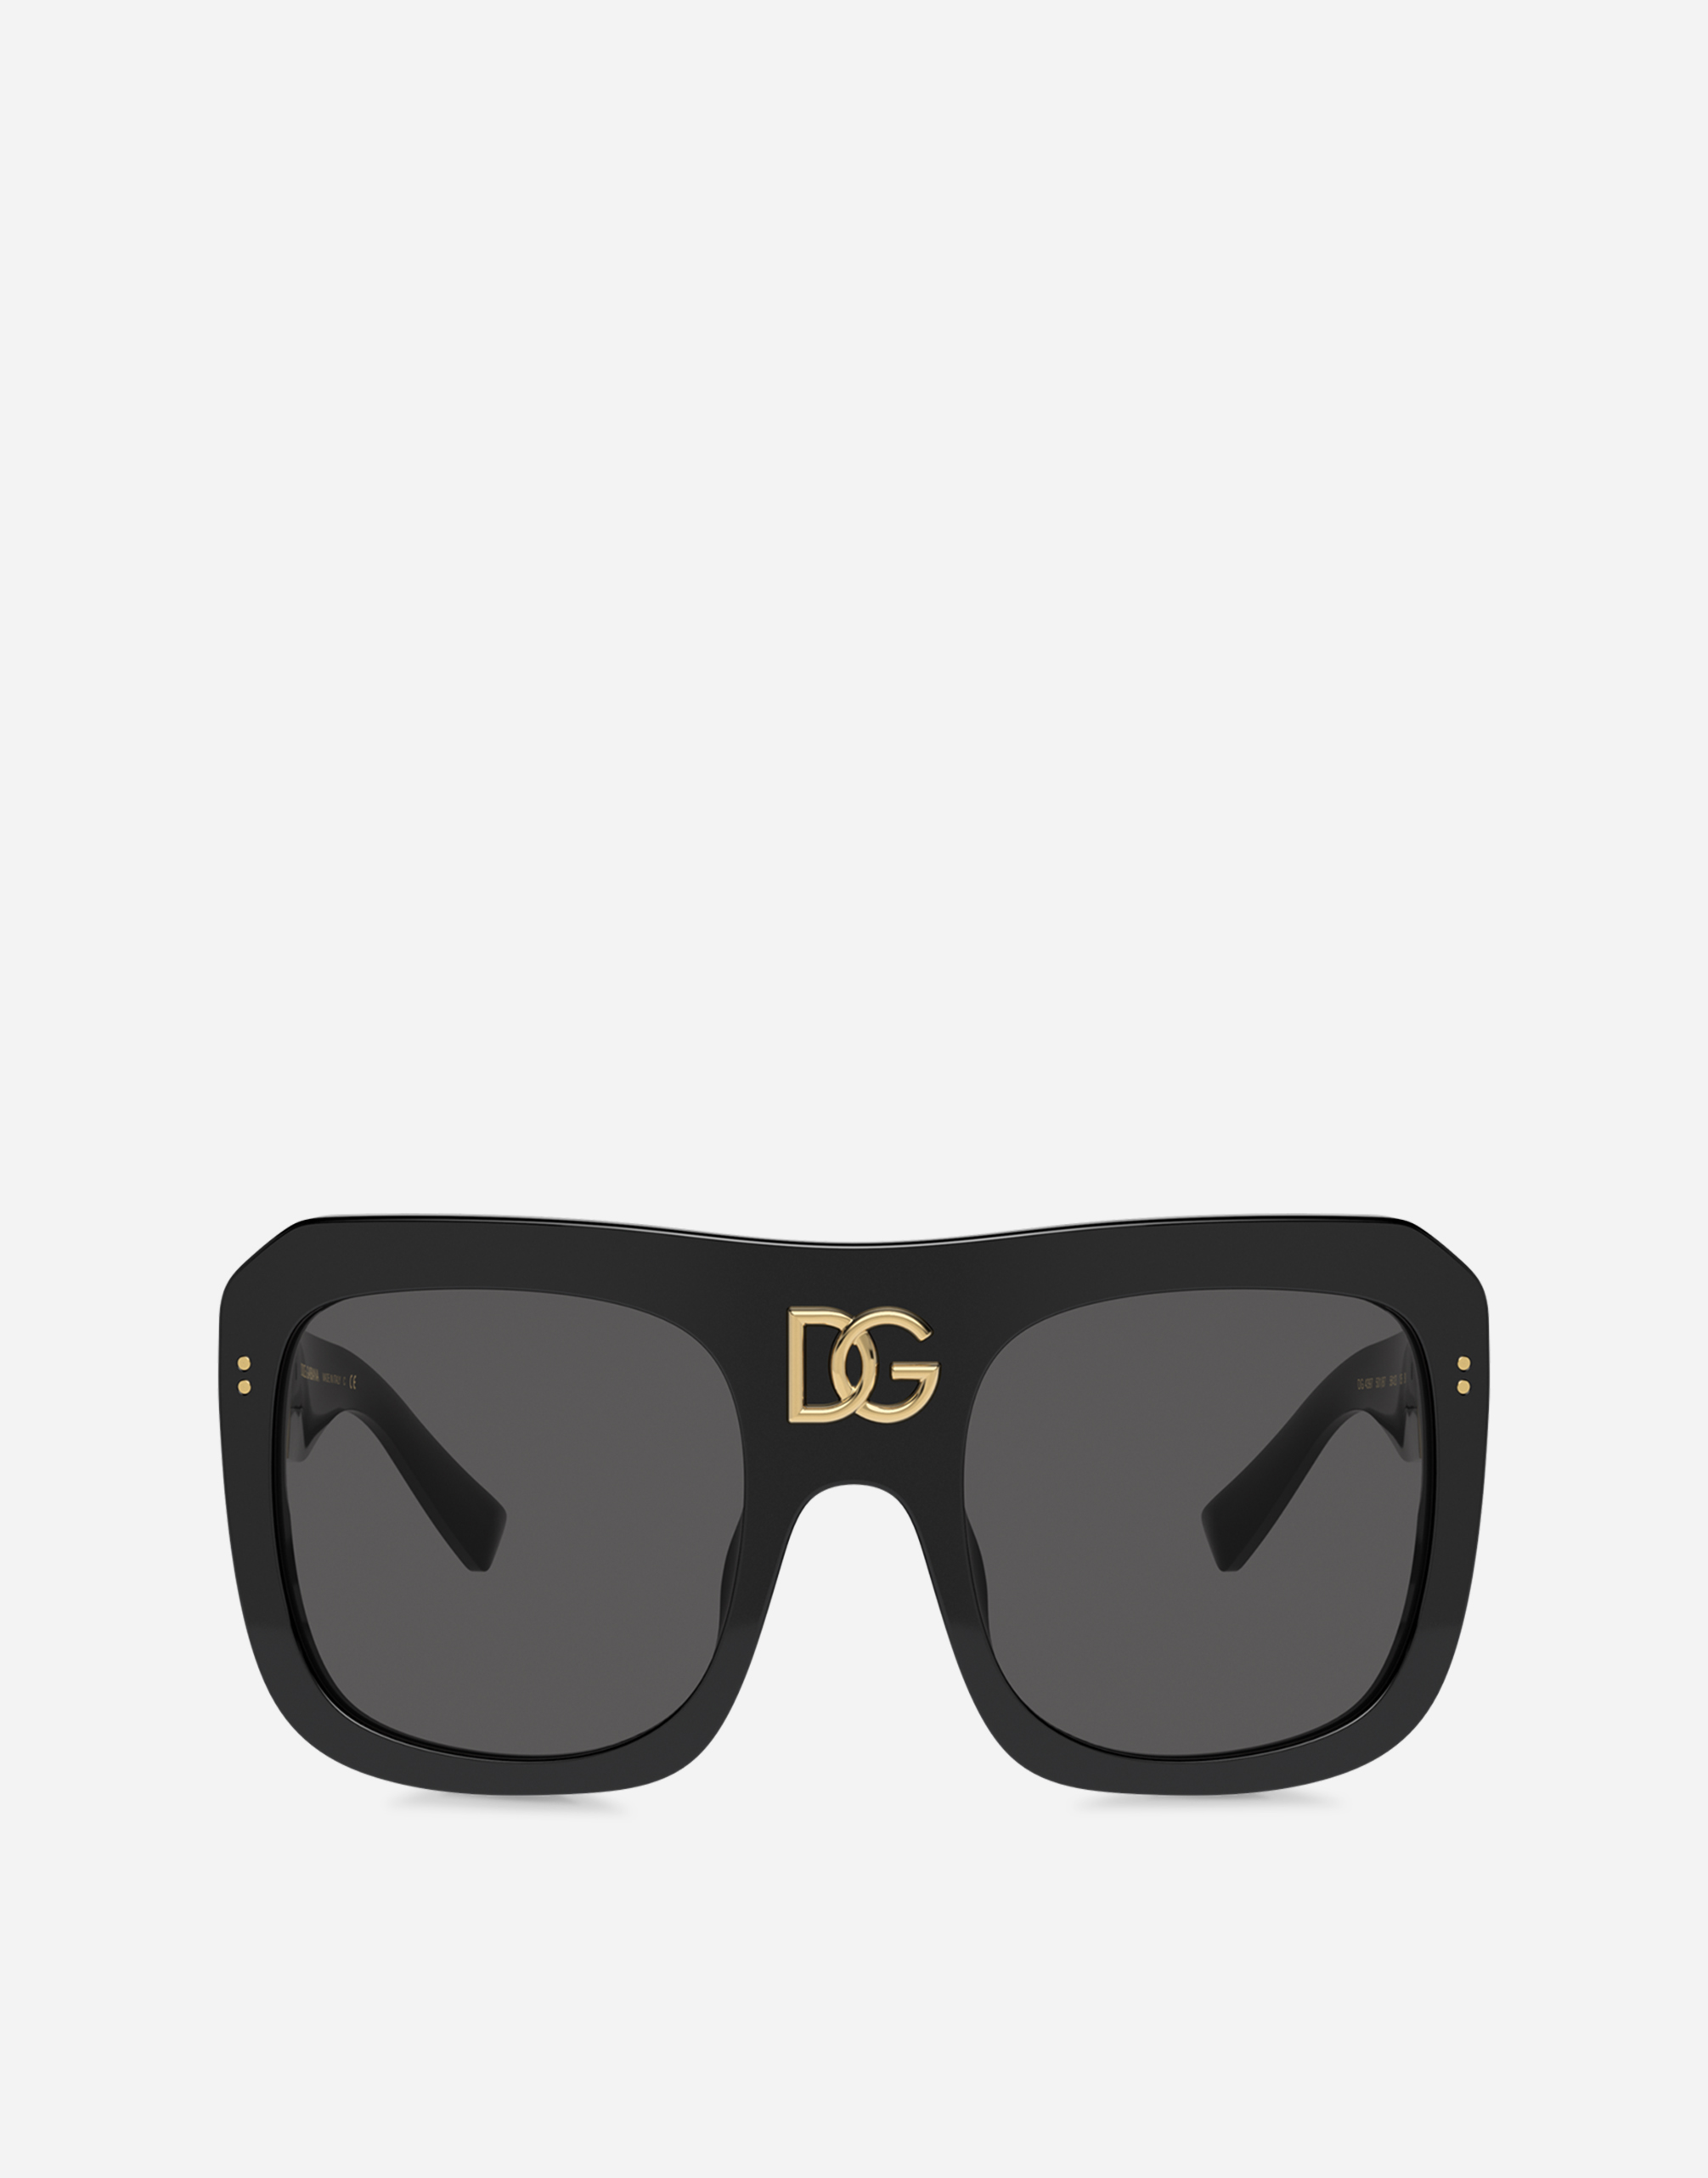 90s sunglasses in Black and Gold